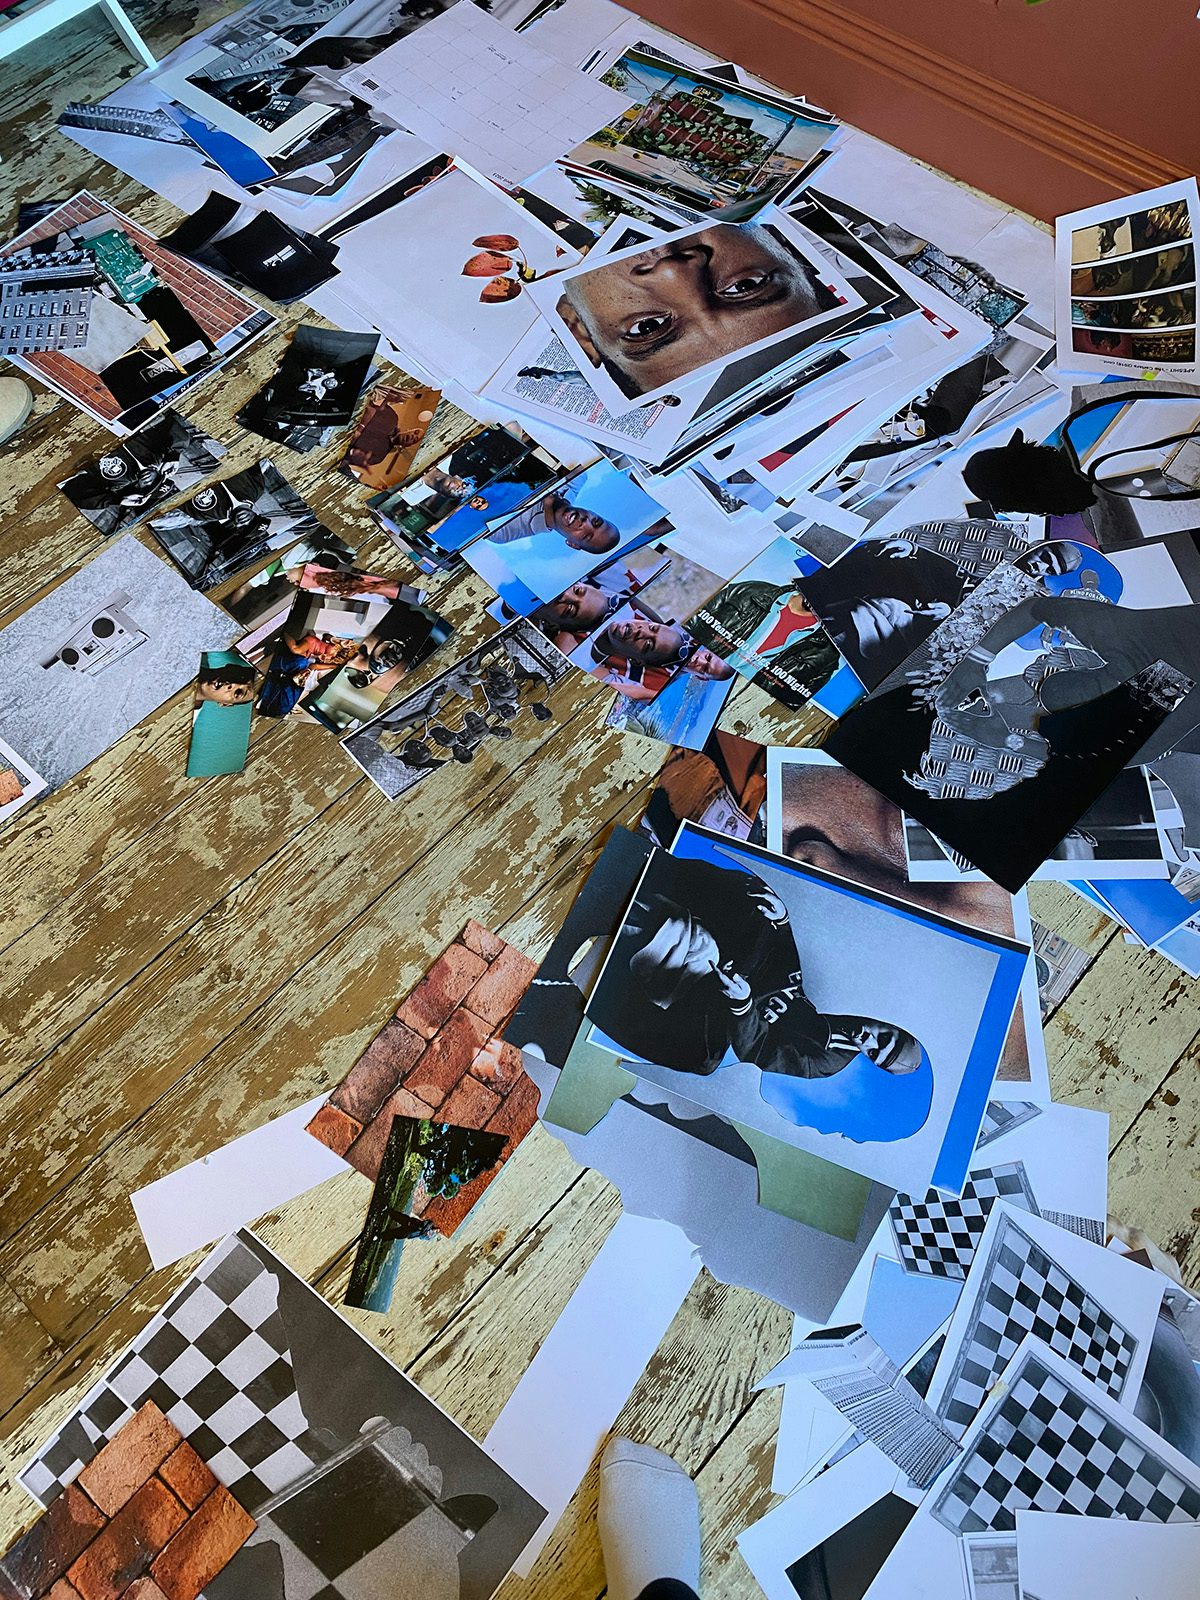 Image shows lots of photographs pertaining to Jay Z scattered on a wooden floor by artist Jazz Grant